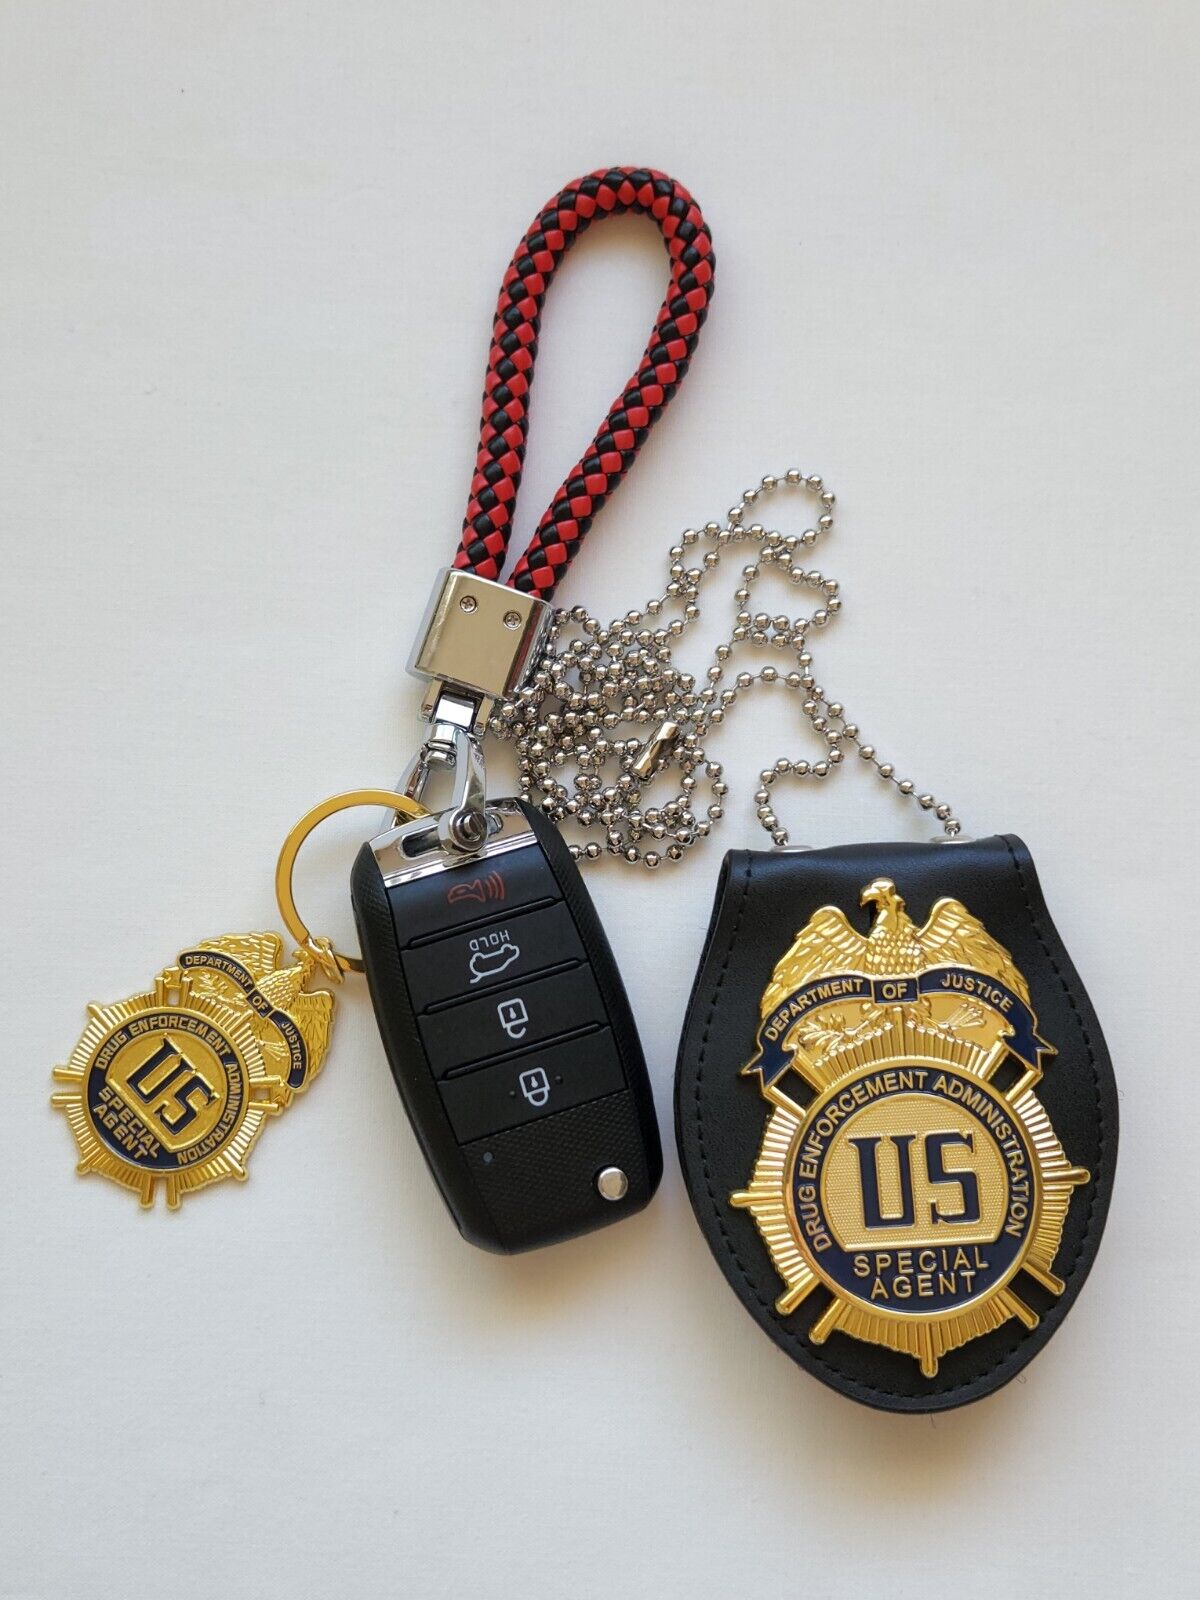 DEA Special Agent Keychain And Full Size Replica Badge With Holder 